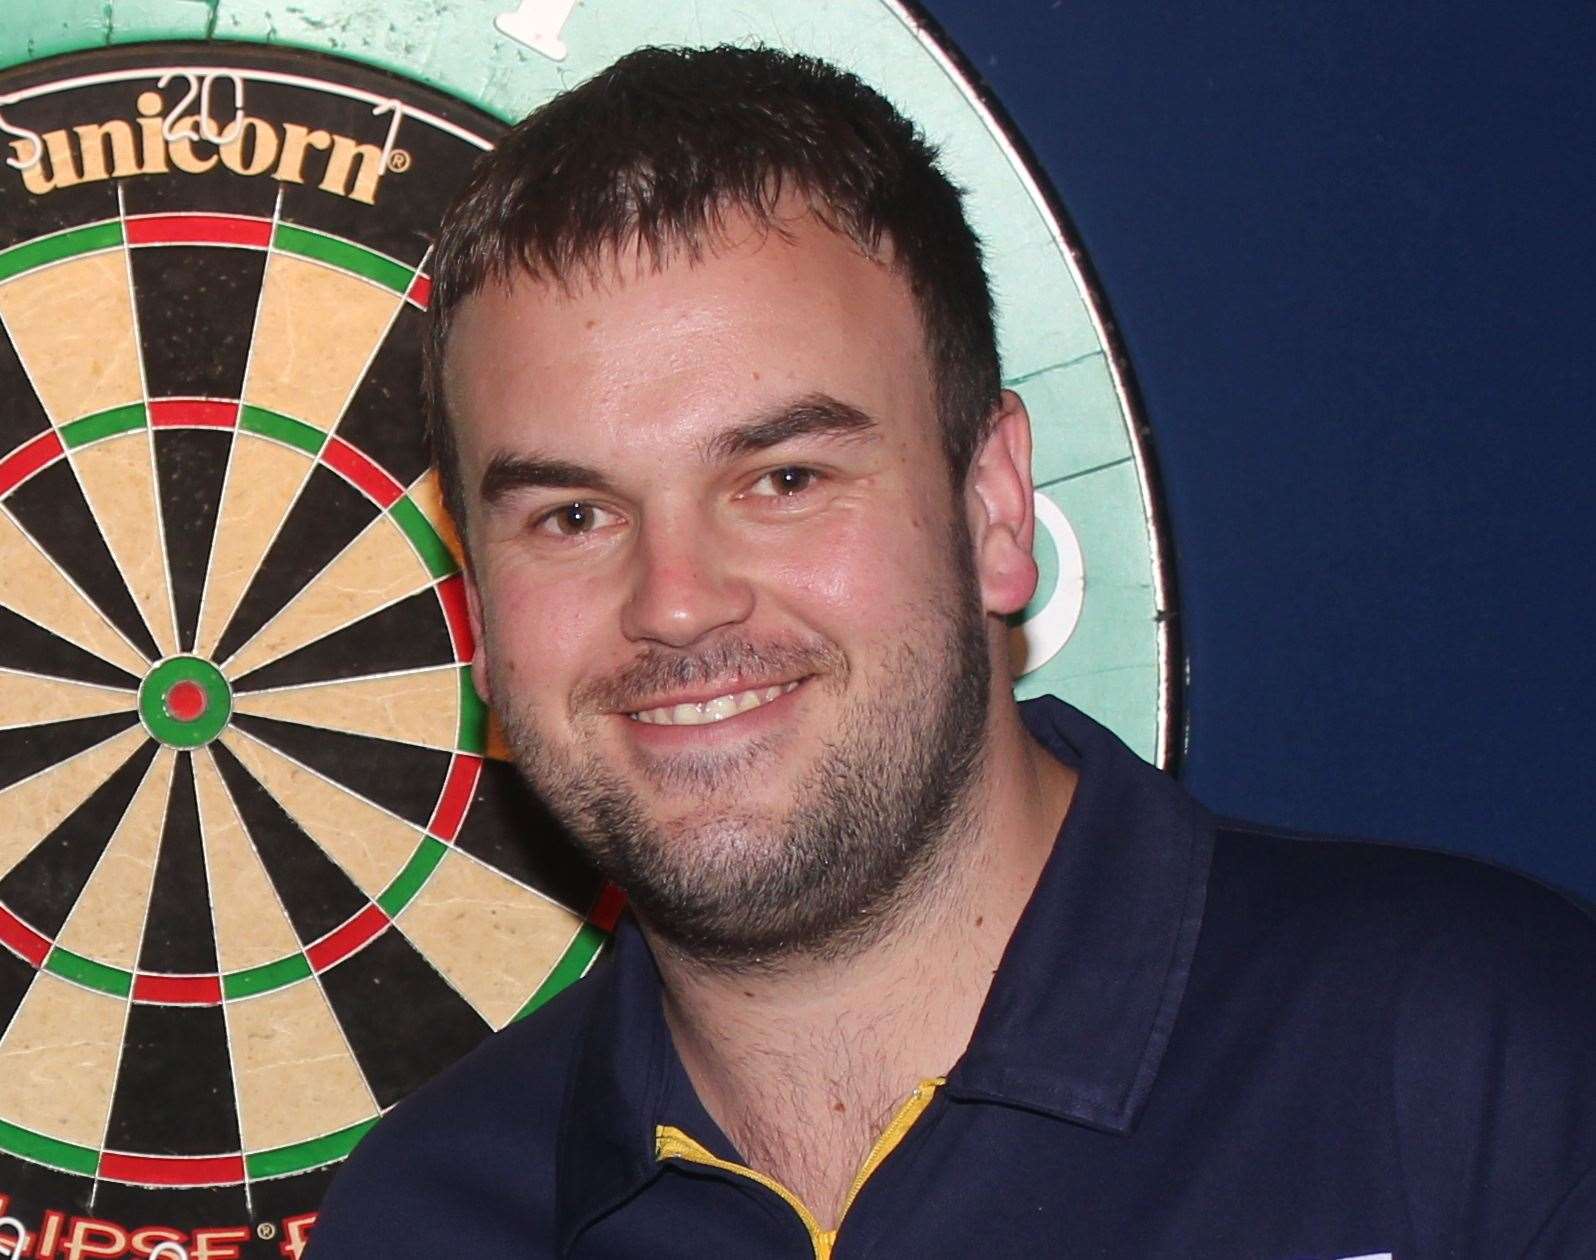 Deal professional darts players Ross Smith lost the group decider on Monday night